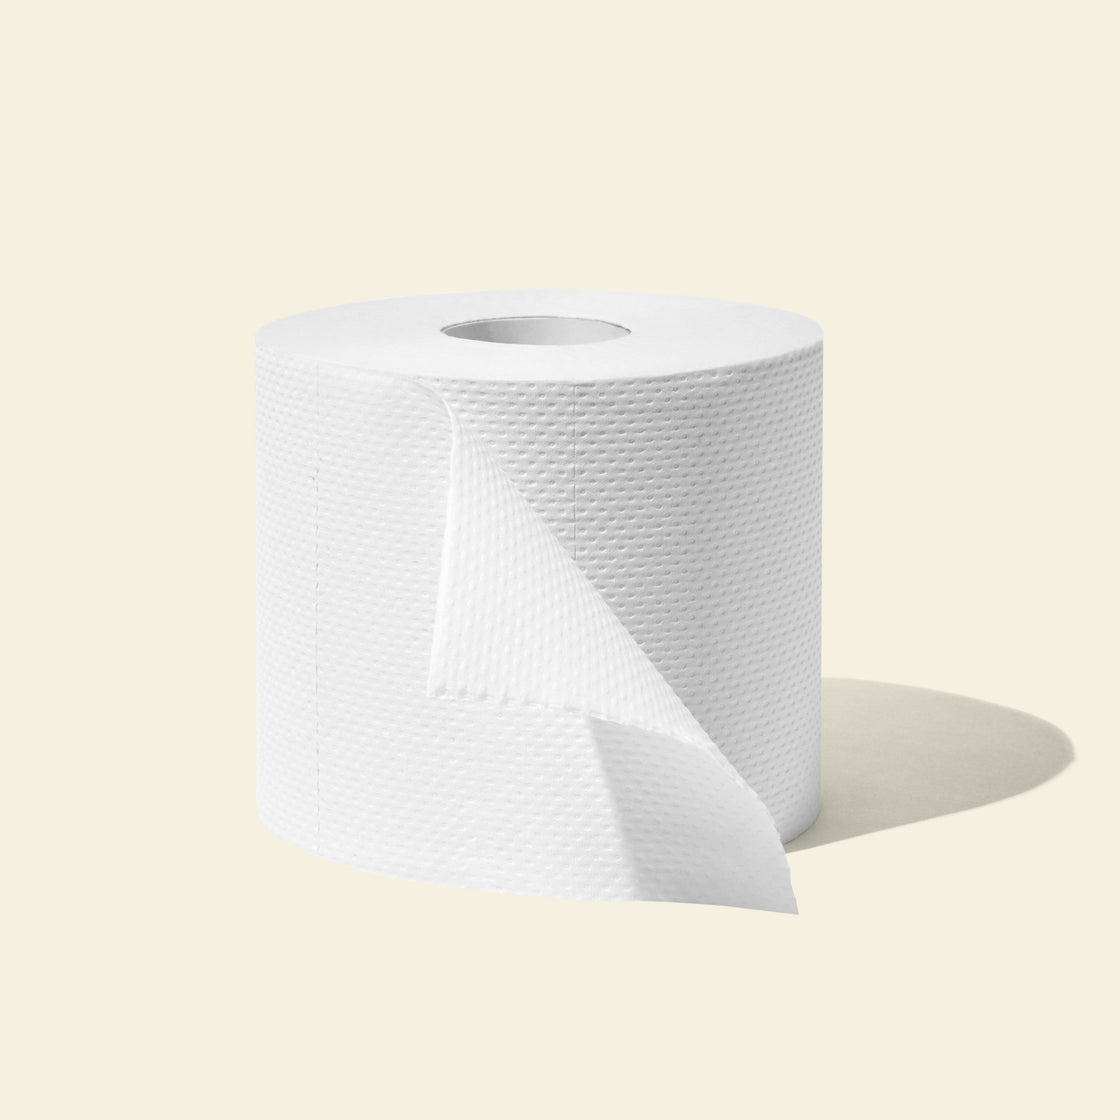 The Best Toilet Paper That's Better for the Environment